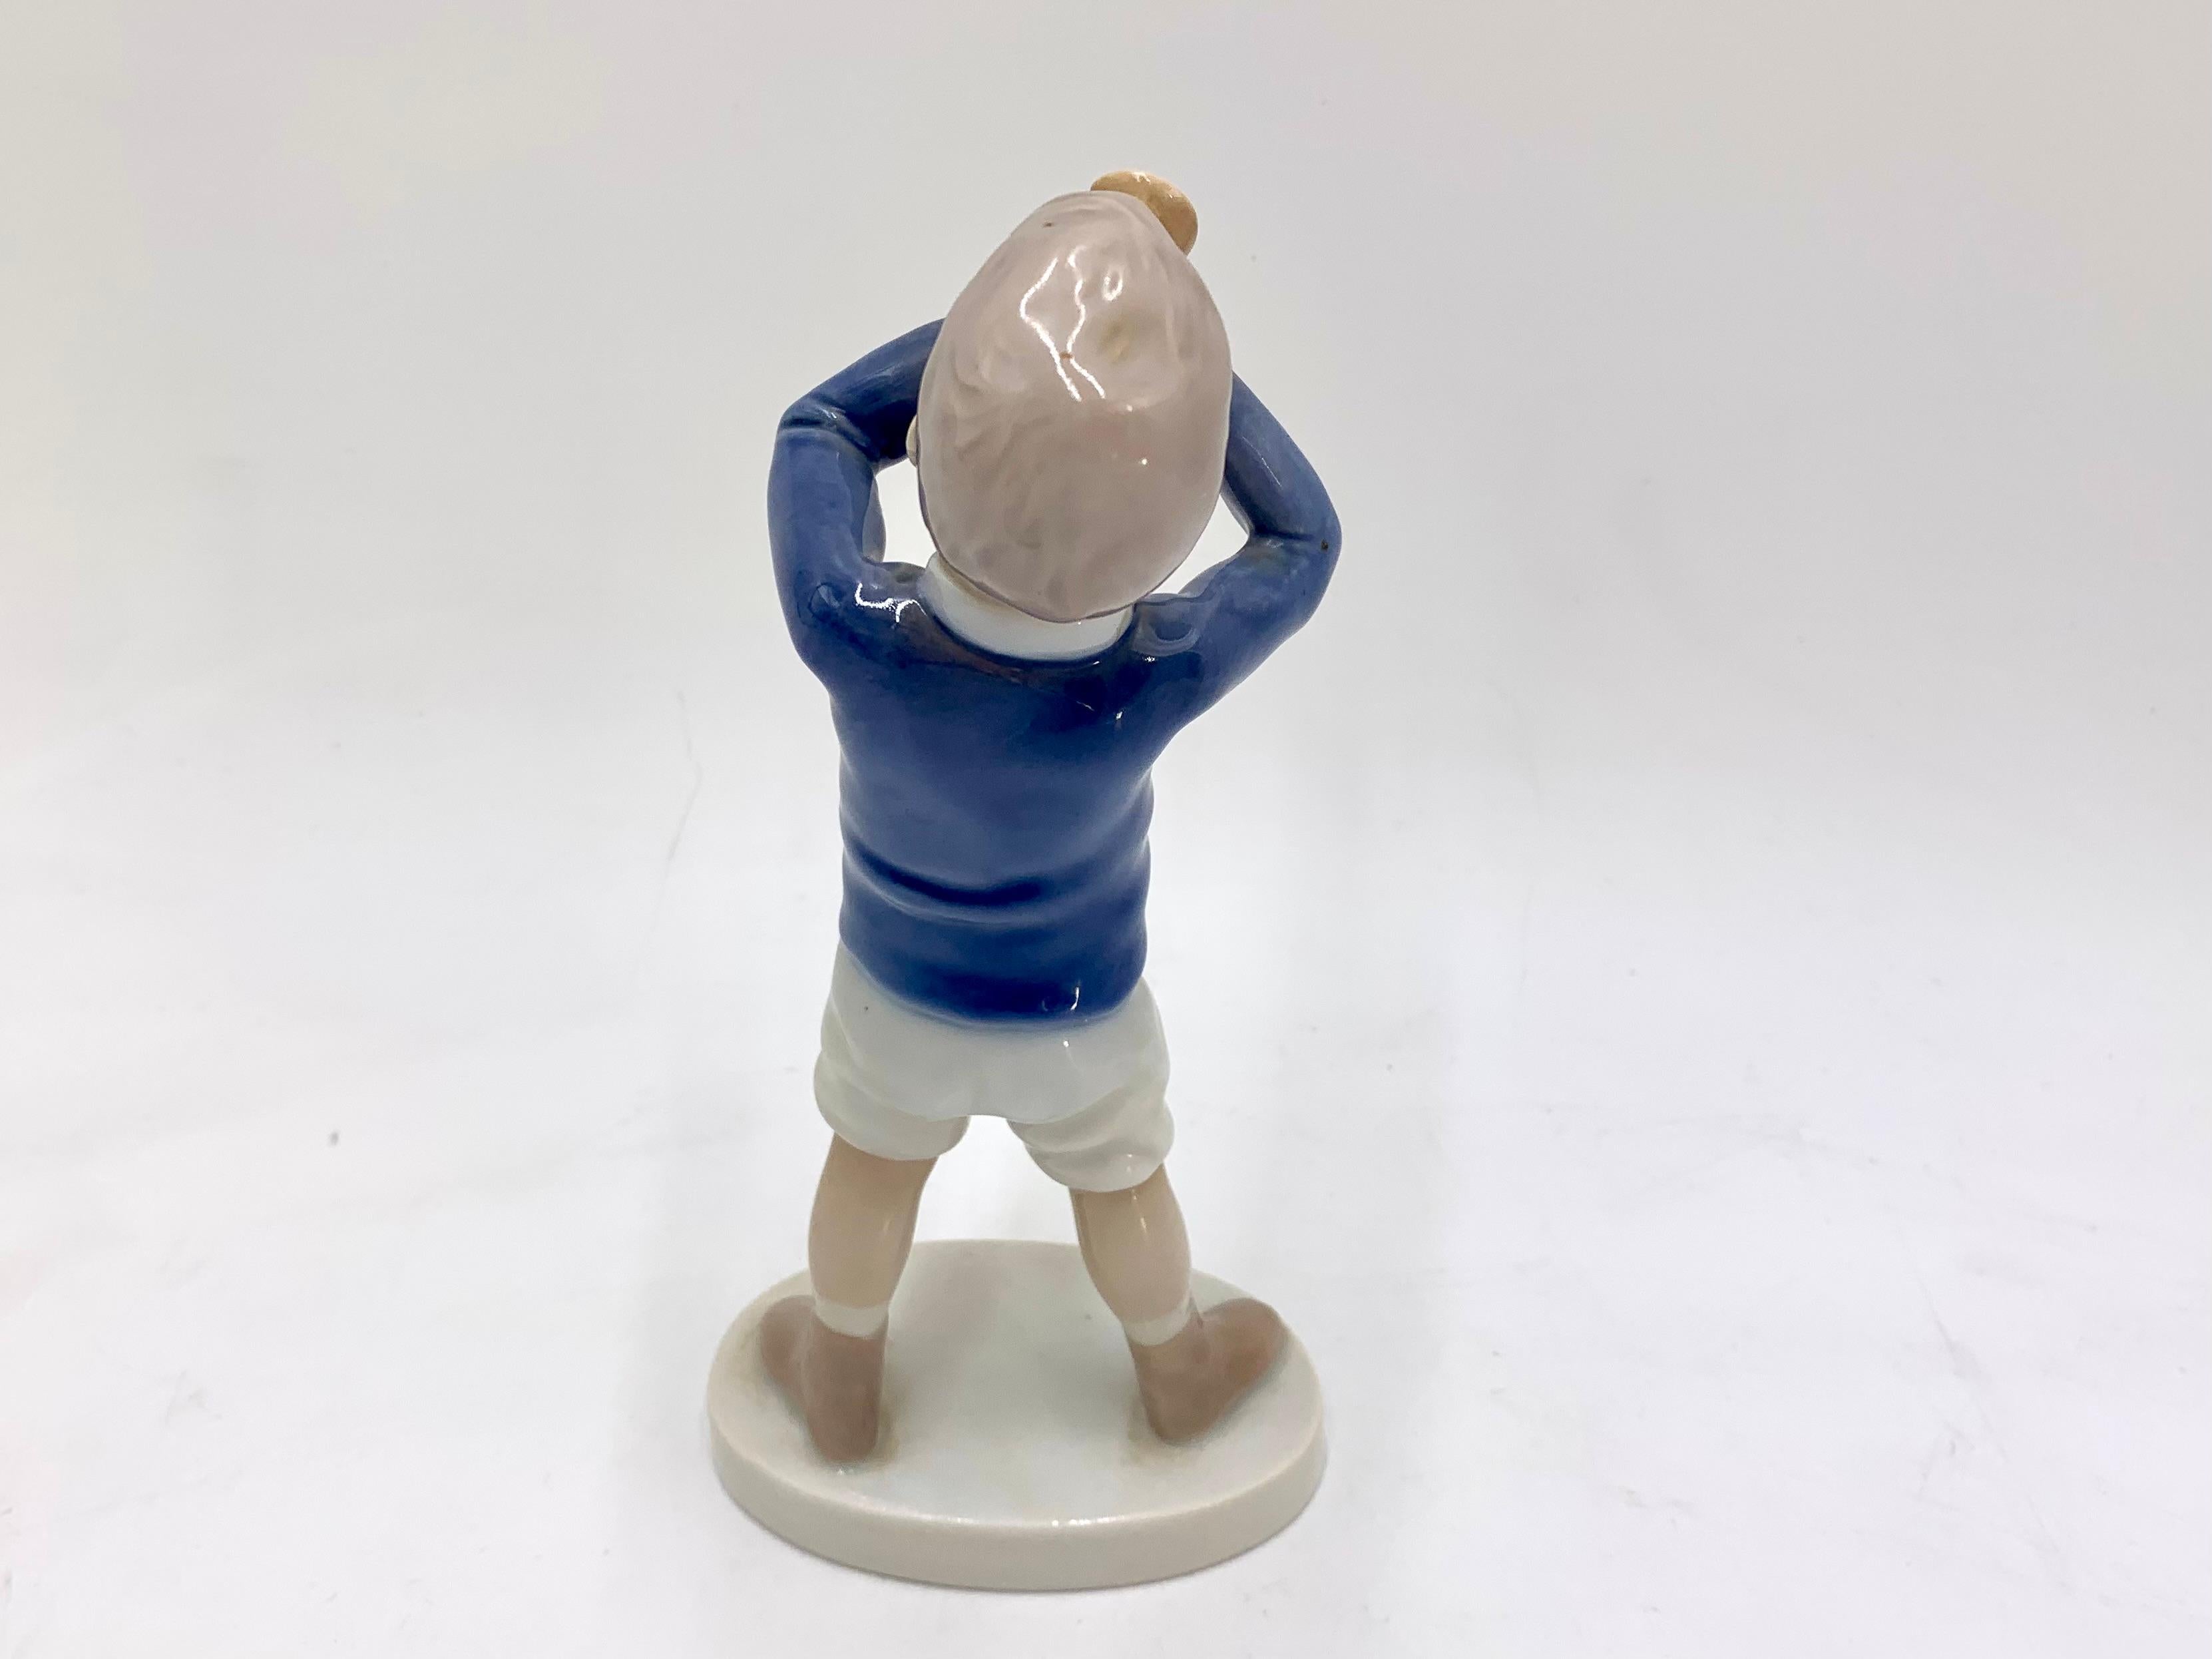 Mid-Century Modern Porcelain Figurine of a Boy with a Trumpet, Bing & Grondahl, Denmark, 1970s/80s For Sale